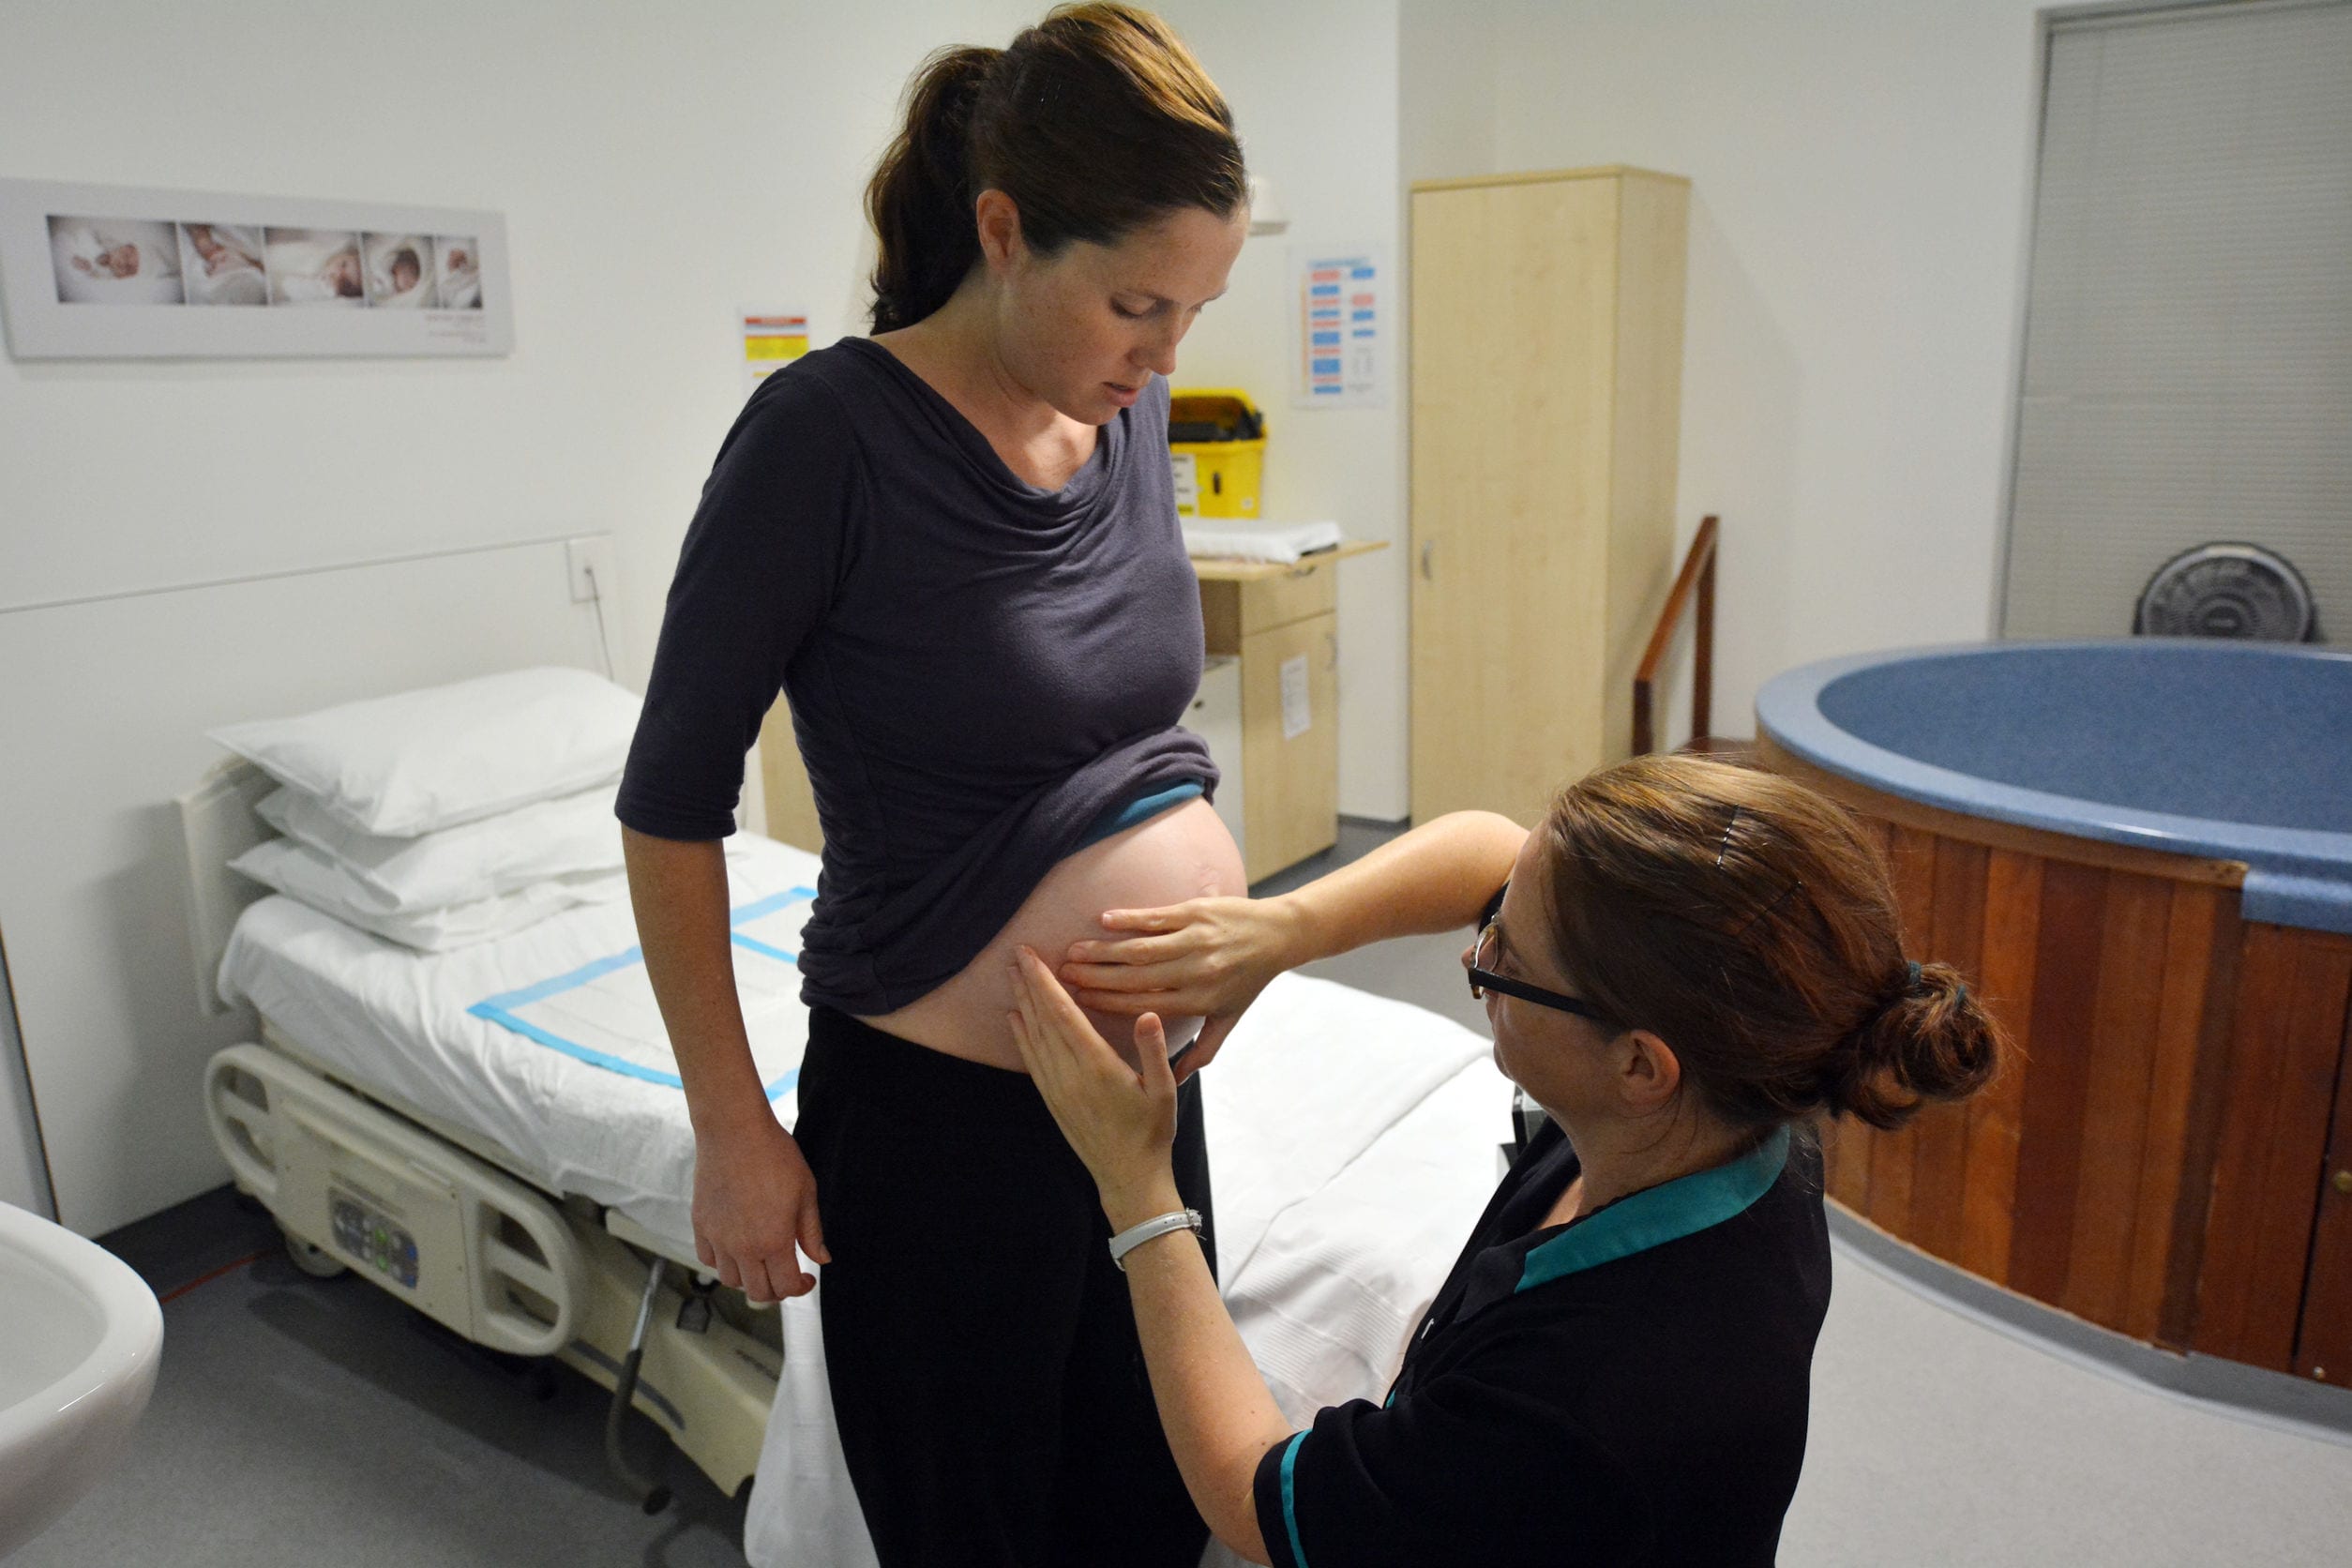 Pregnancy and Childbirth: What to Bring to the Hospital